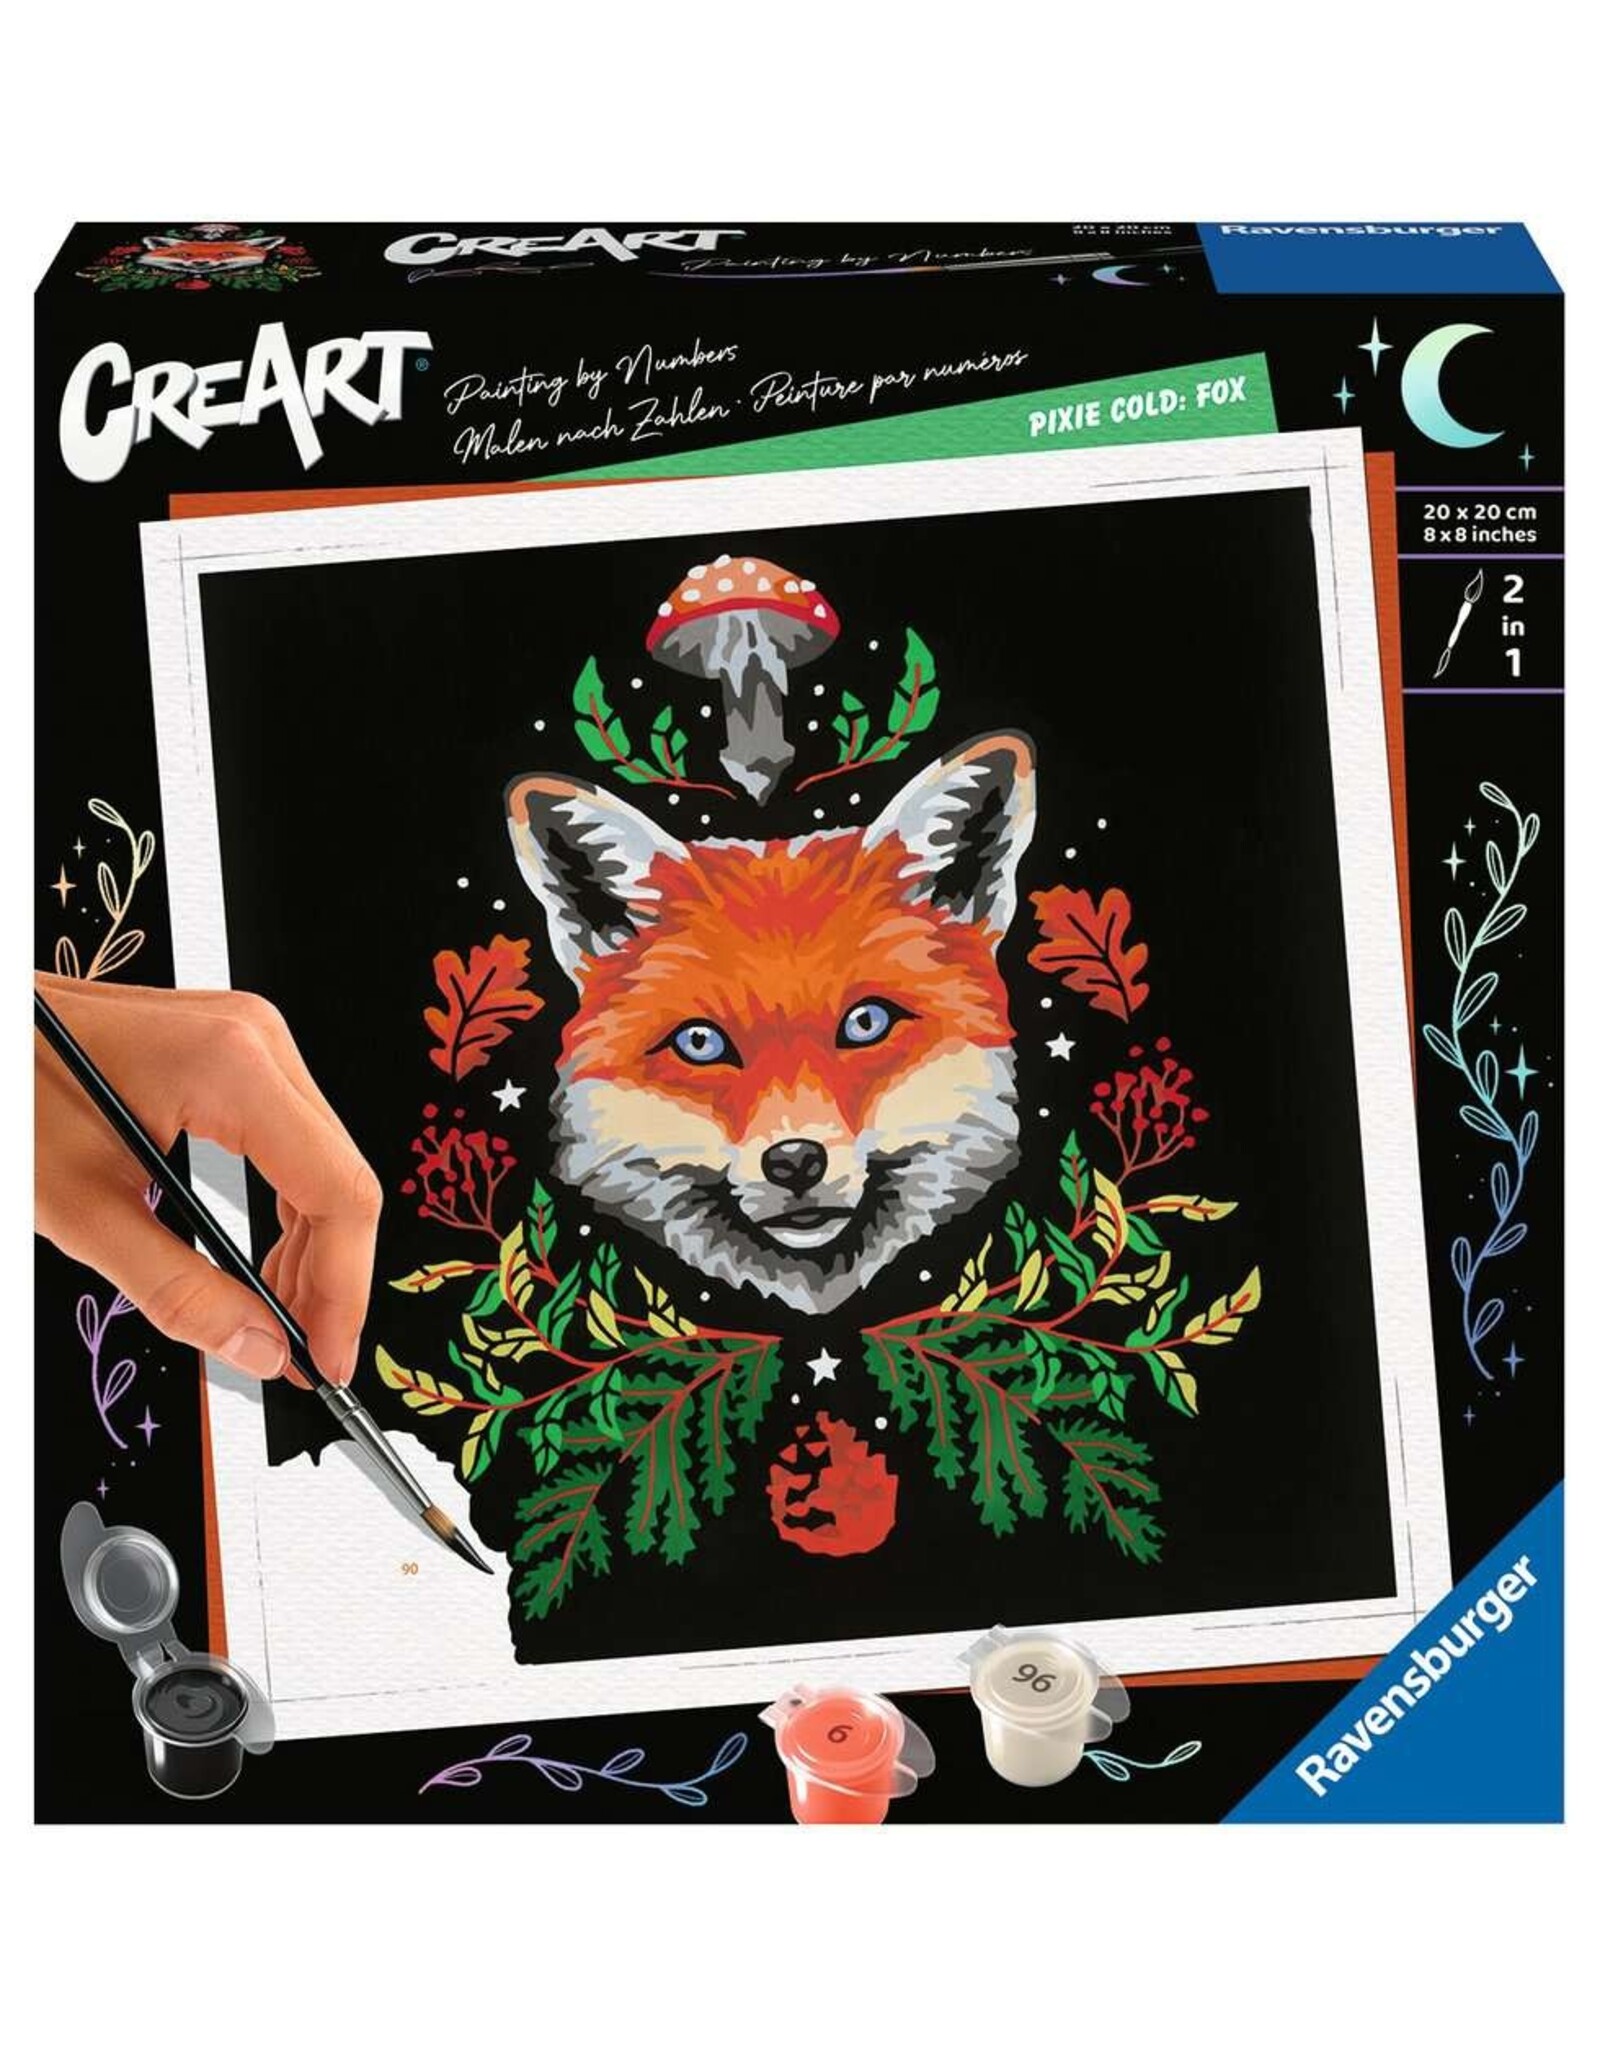 Ravensburger CreArt Paint by Number: Pixie Cold: Fox